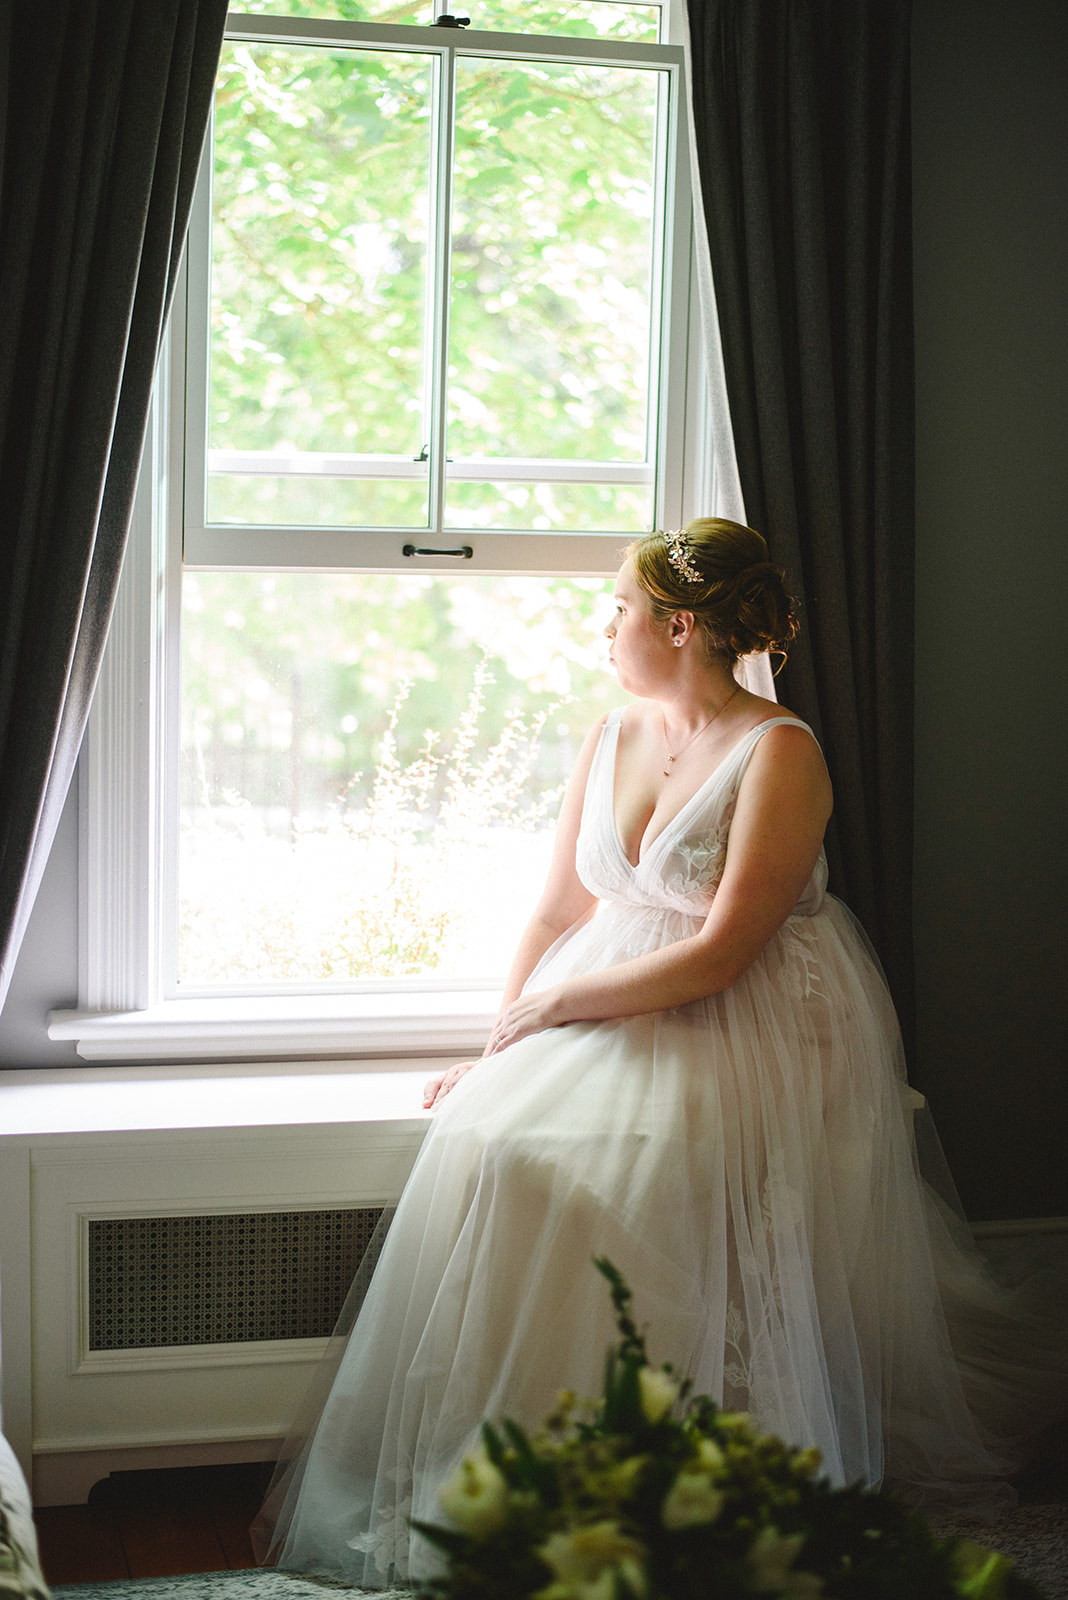 A bride just about to get married at her home in Newmarket staring out the window. 